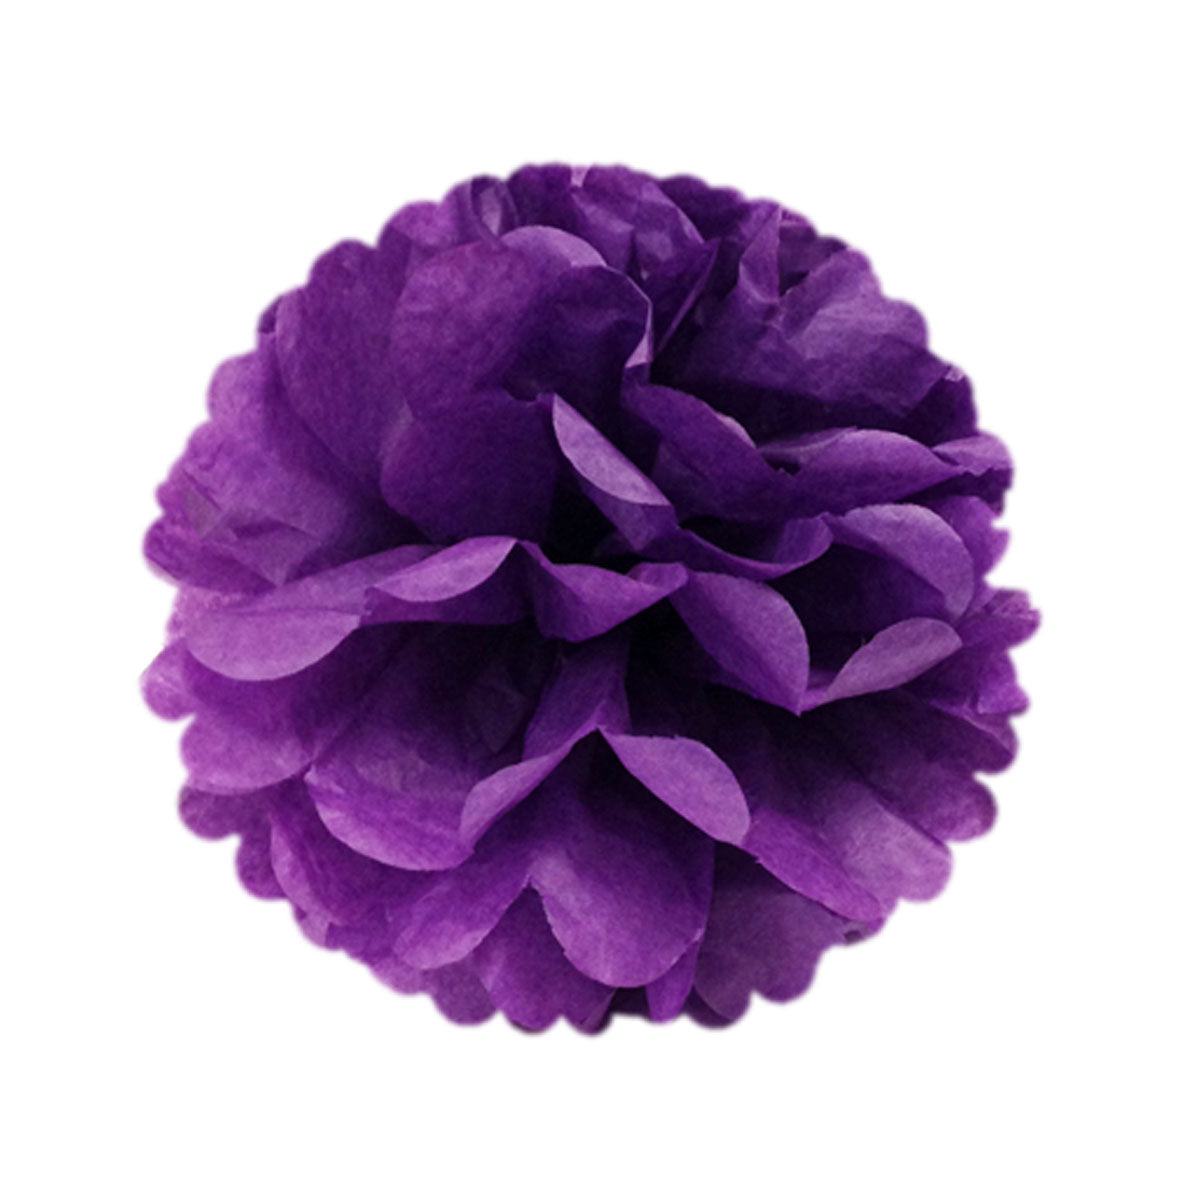 Wrapables 12" Set of 3 Tissue Pom Poms Party Decorations